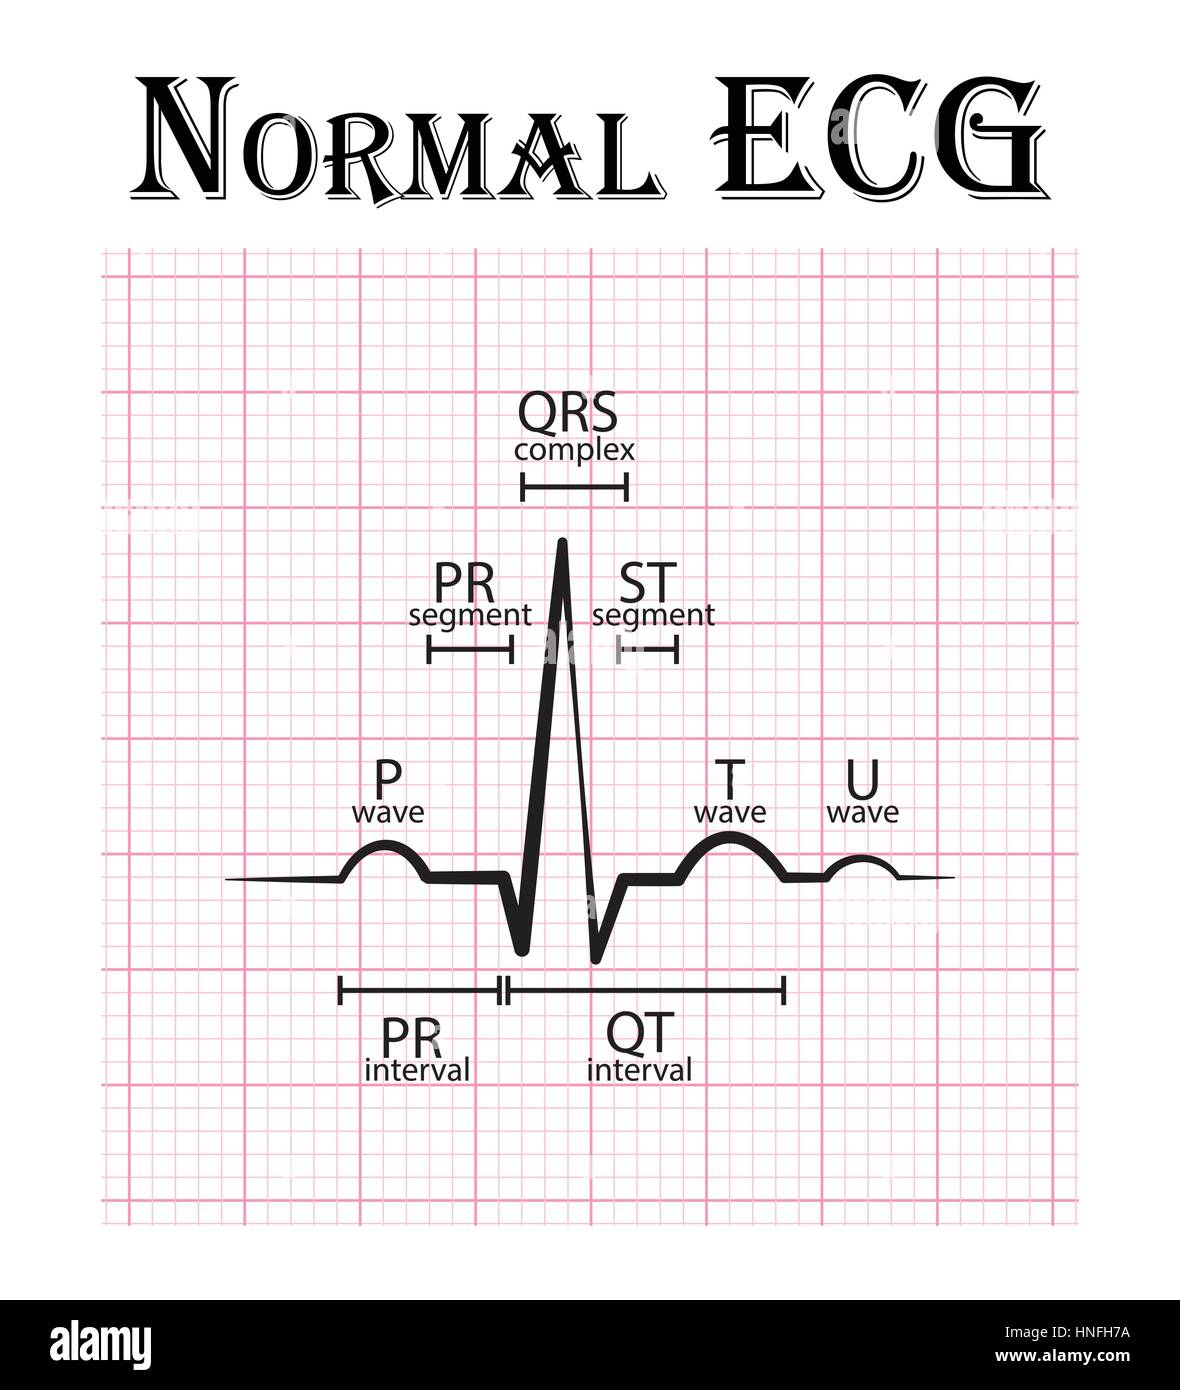 Normal Ecg High Resolution Stock Photography and Images - Alamy